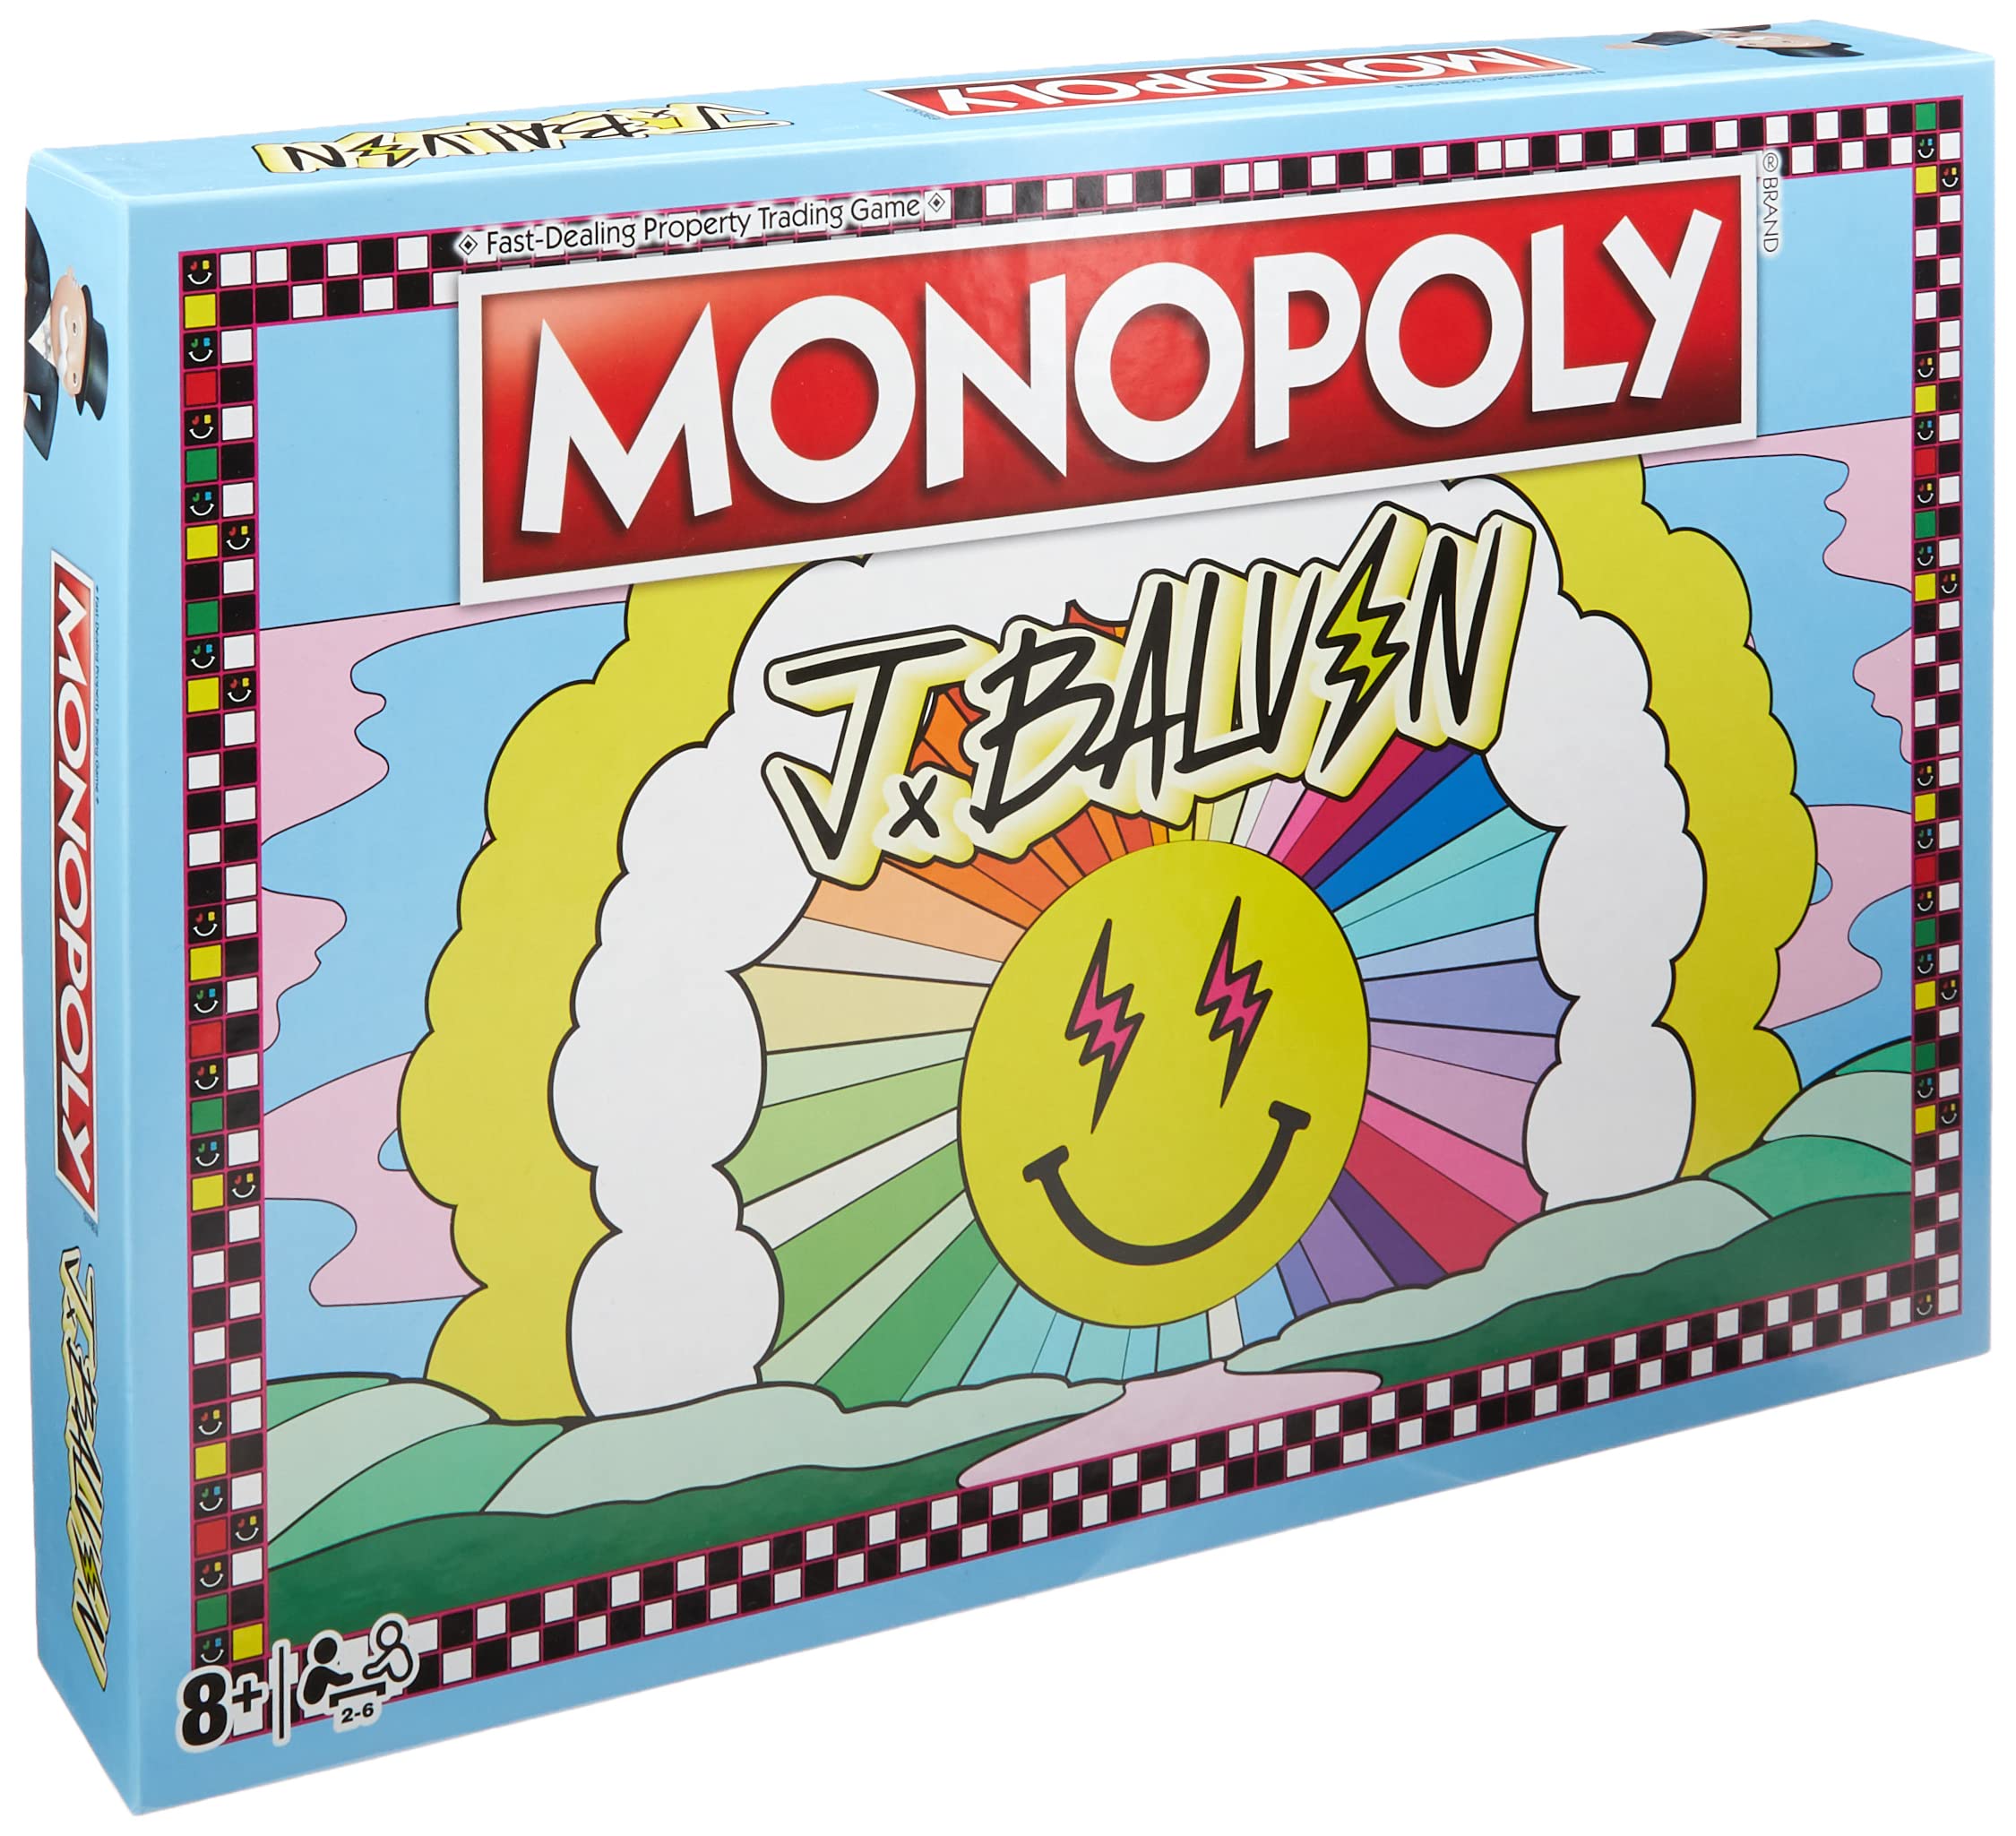 Monopoly Game J Balvin Limited Edition $7.64 + Free Shipping w/ Prime or on orders over $35